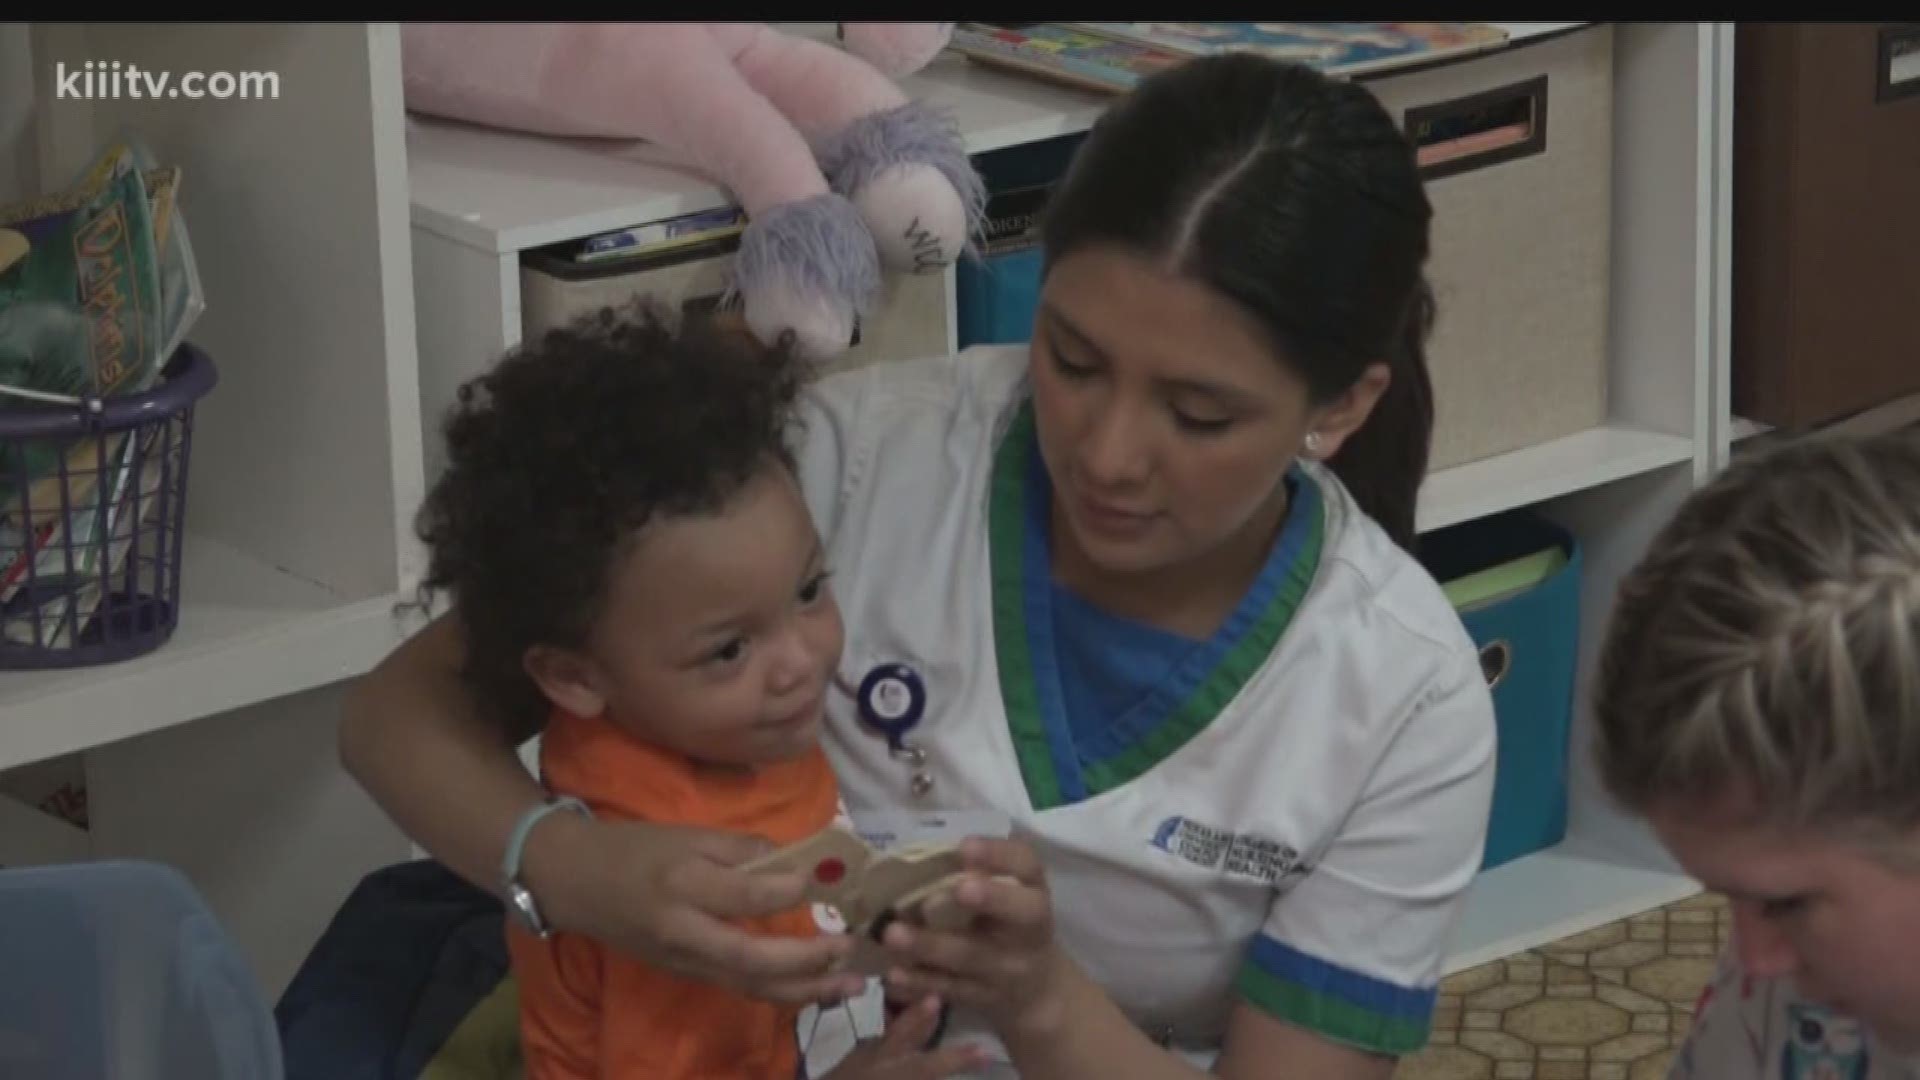 The Wesley Community Center is helping the nursing student at Texas A&amp;M University-Corpus Christi get hands-on experience with younger patients through a new partnership.